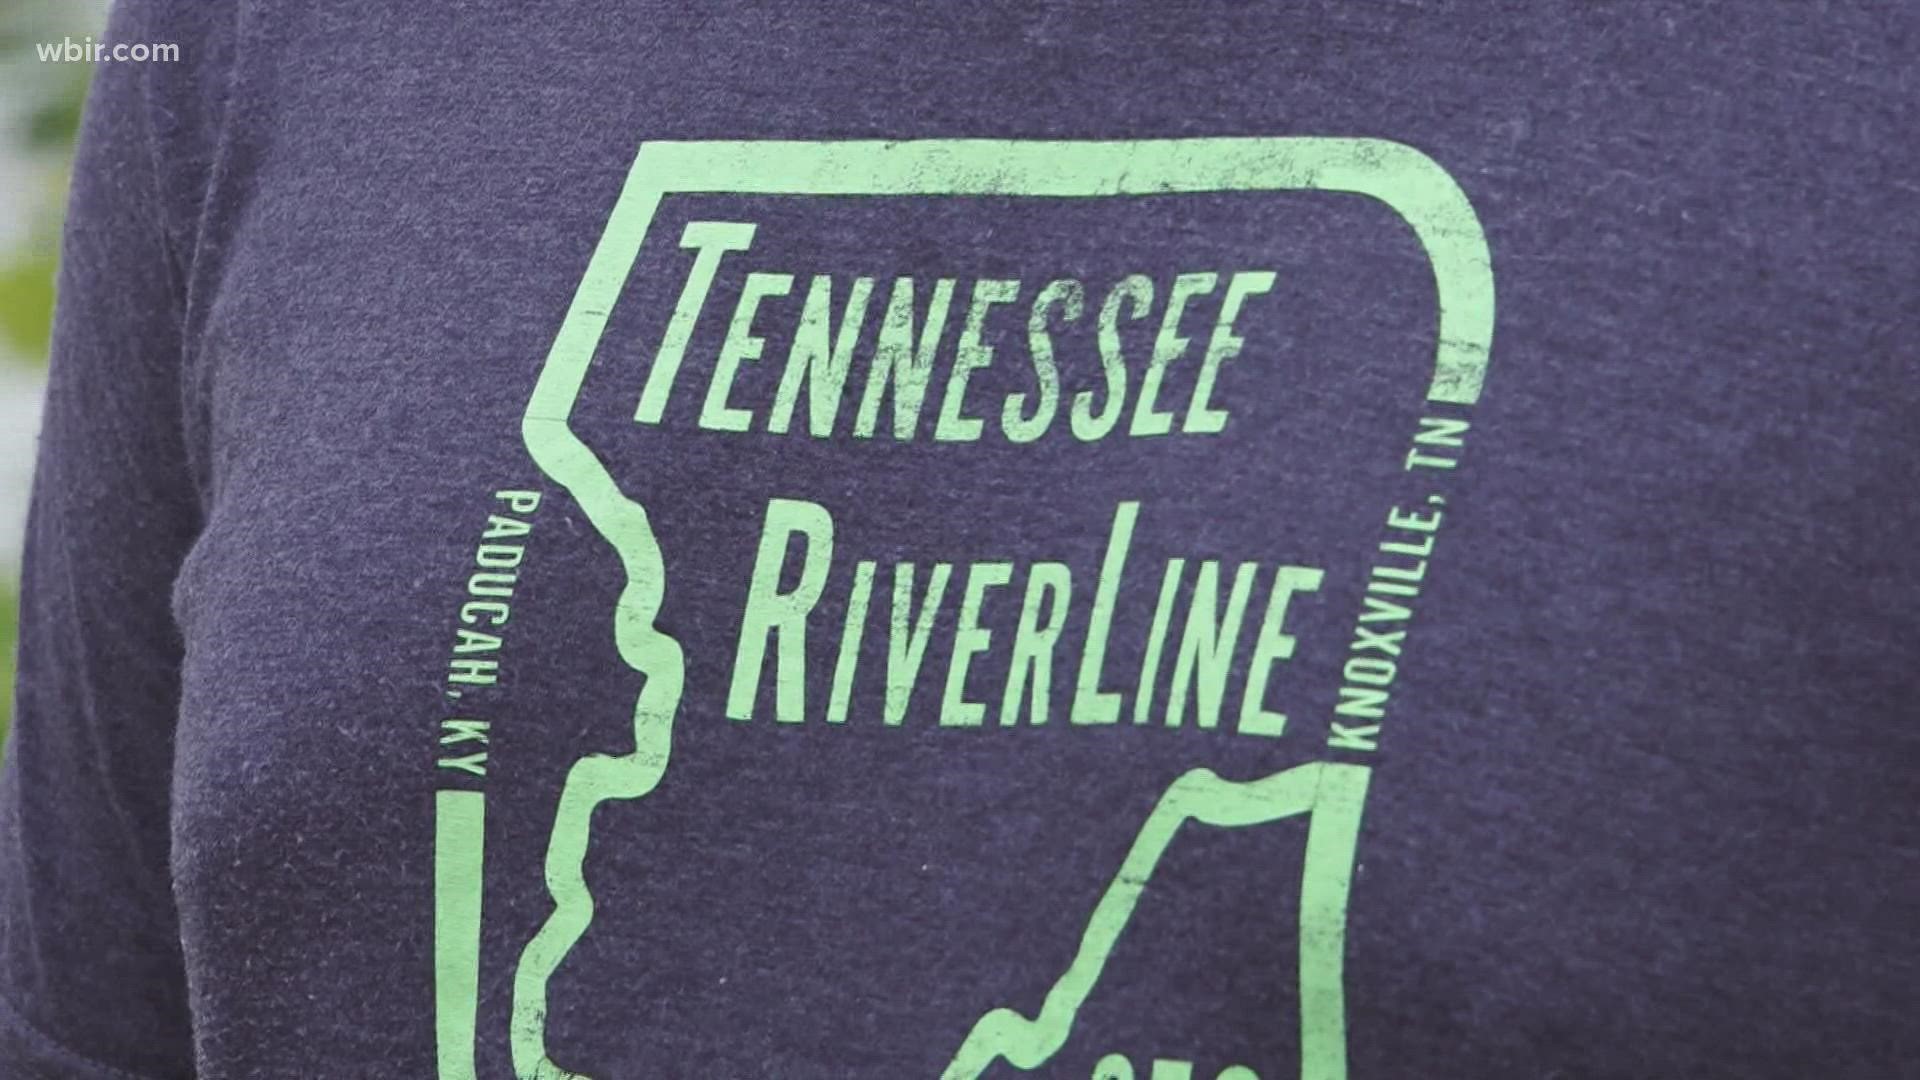 The river-line is a  642-mile system of trails that connects Knoxville to Paducah, Kentucky. It provides paddling, hiking and biking experiences.